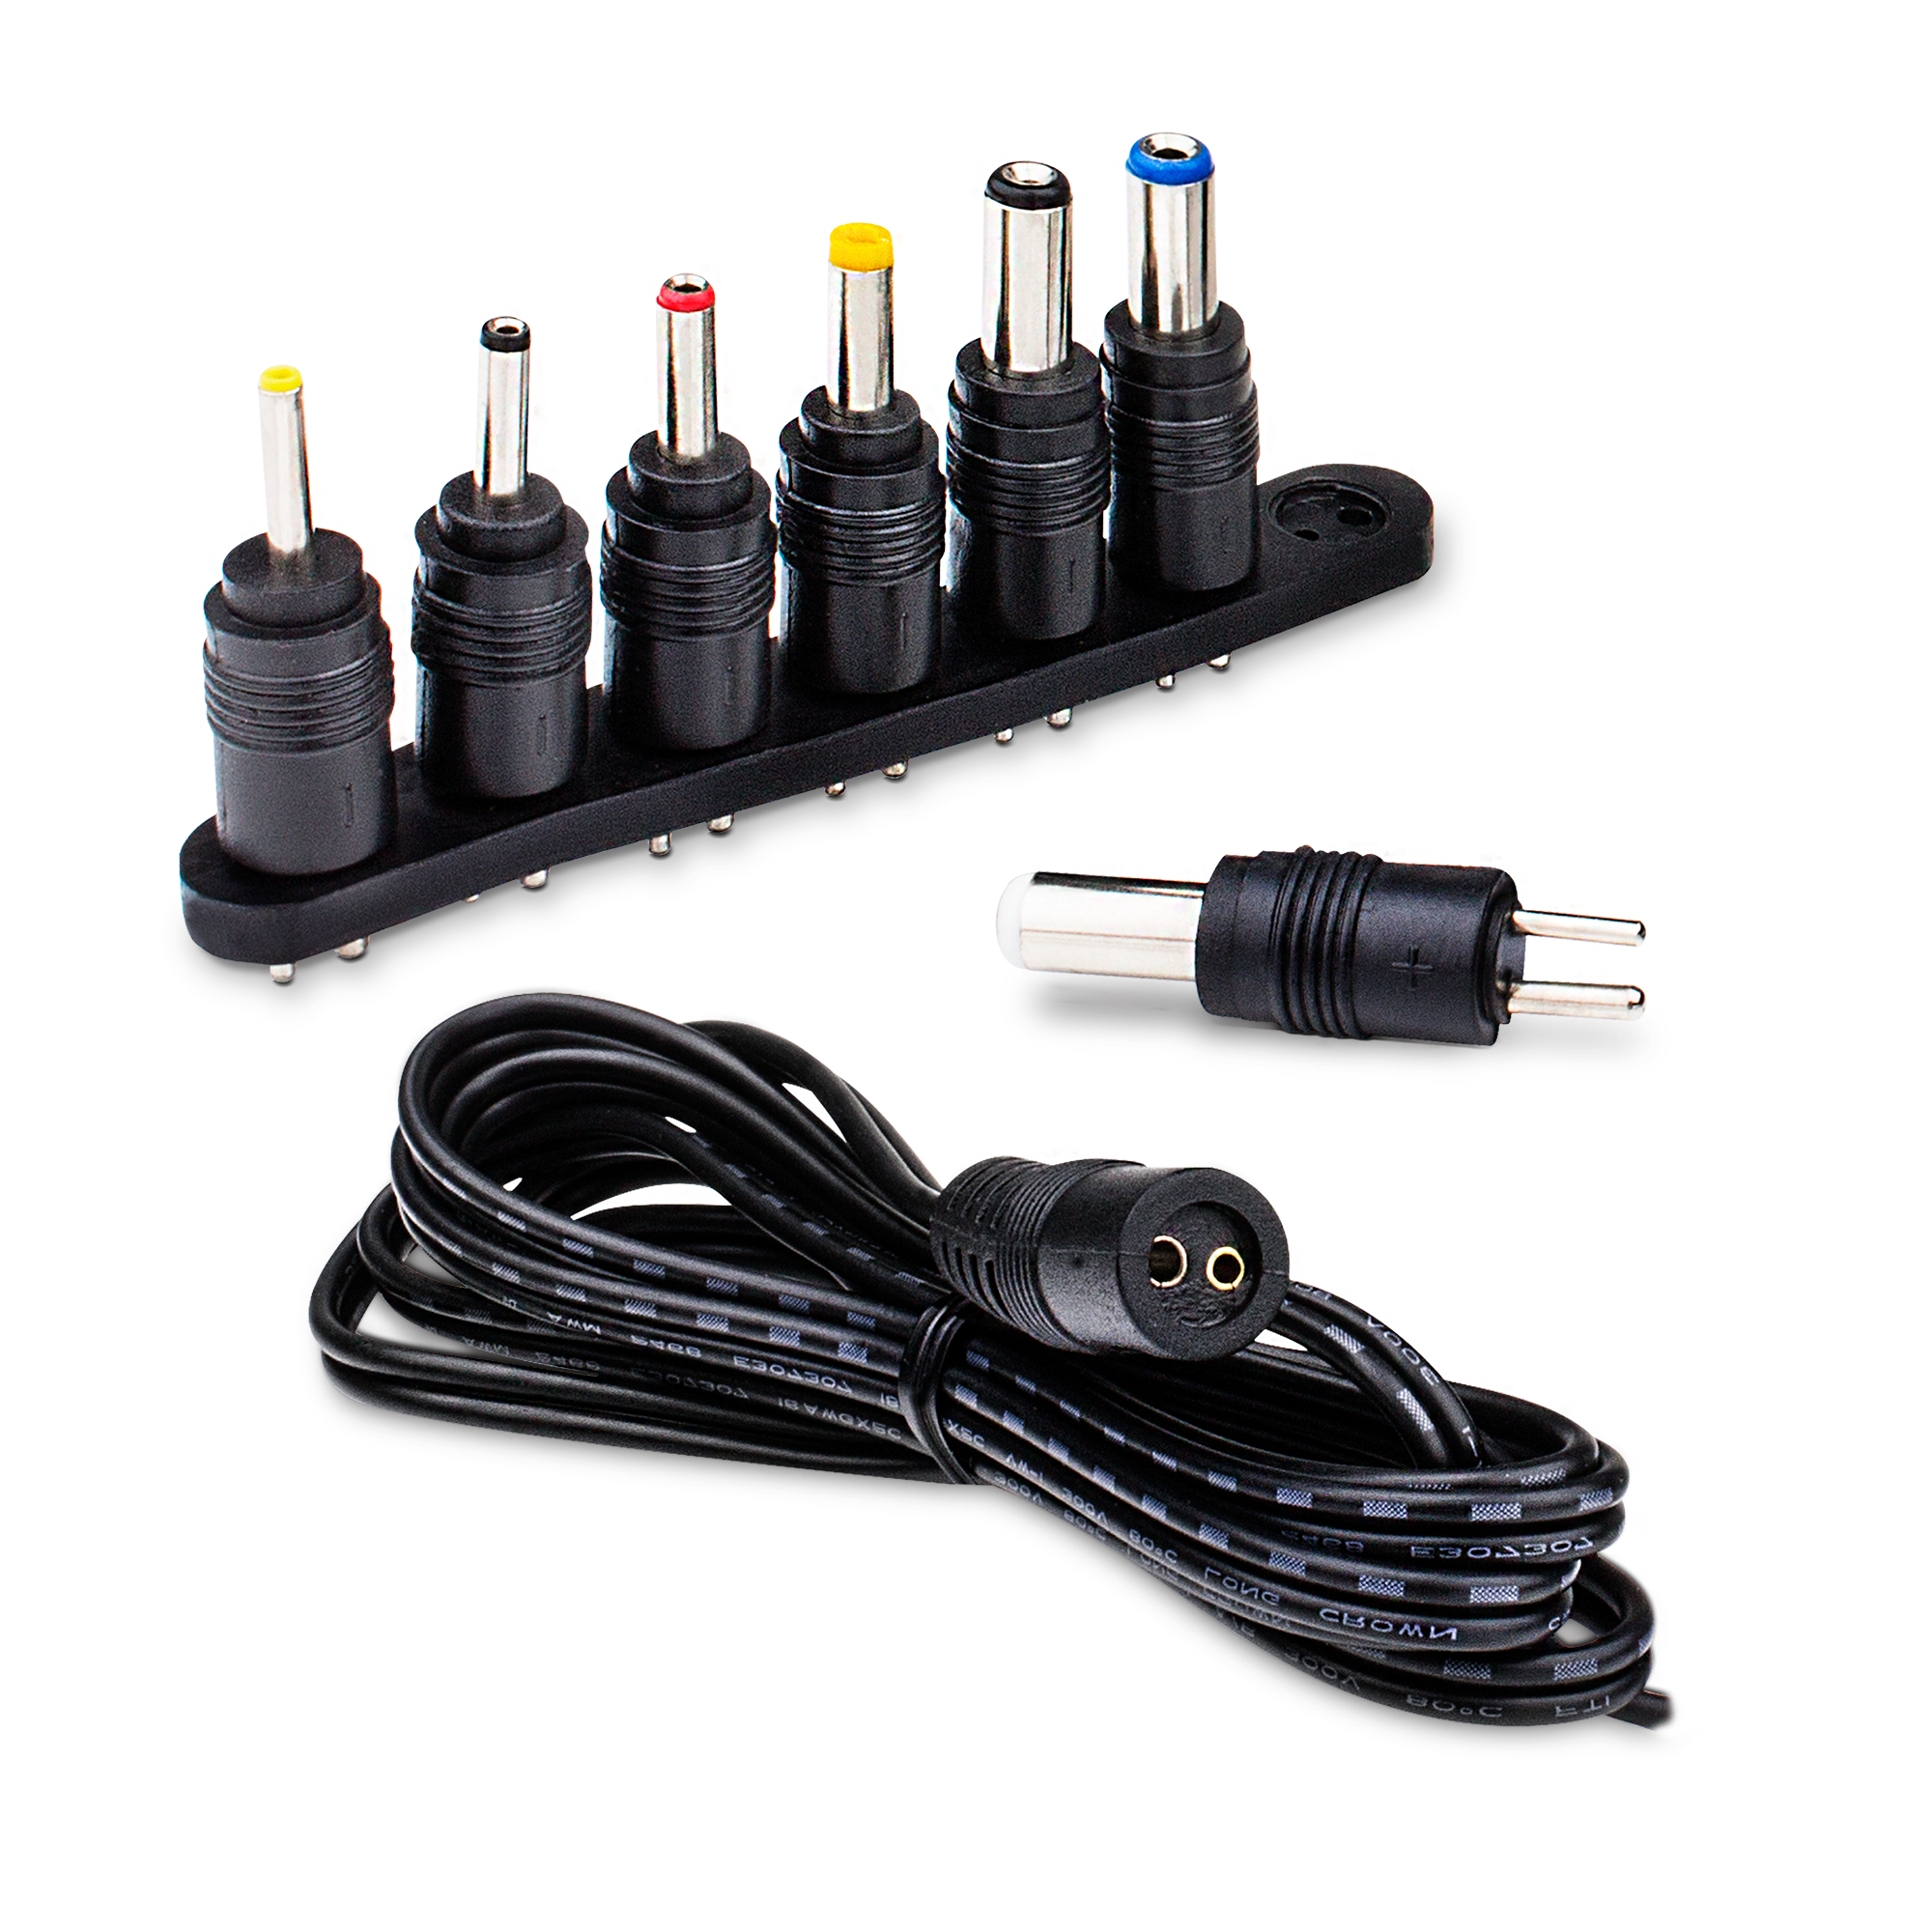 Universal Plug Adapter for Standard USA Outlet 